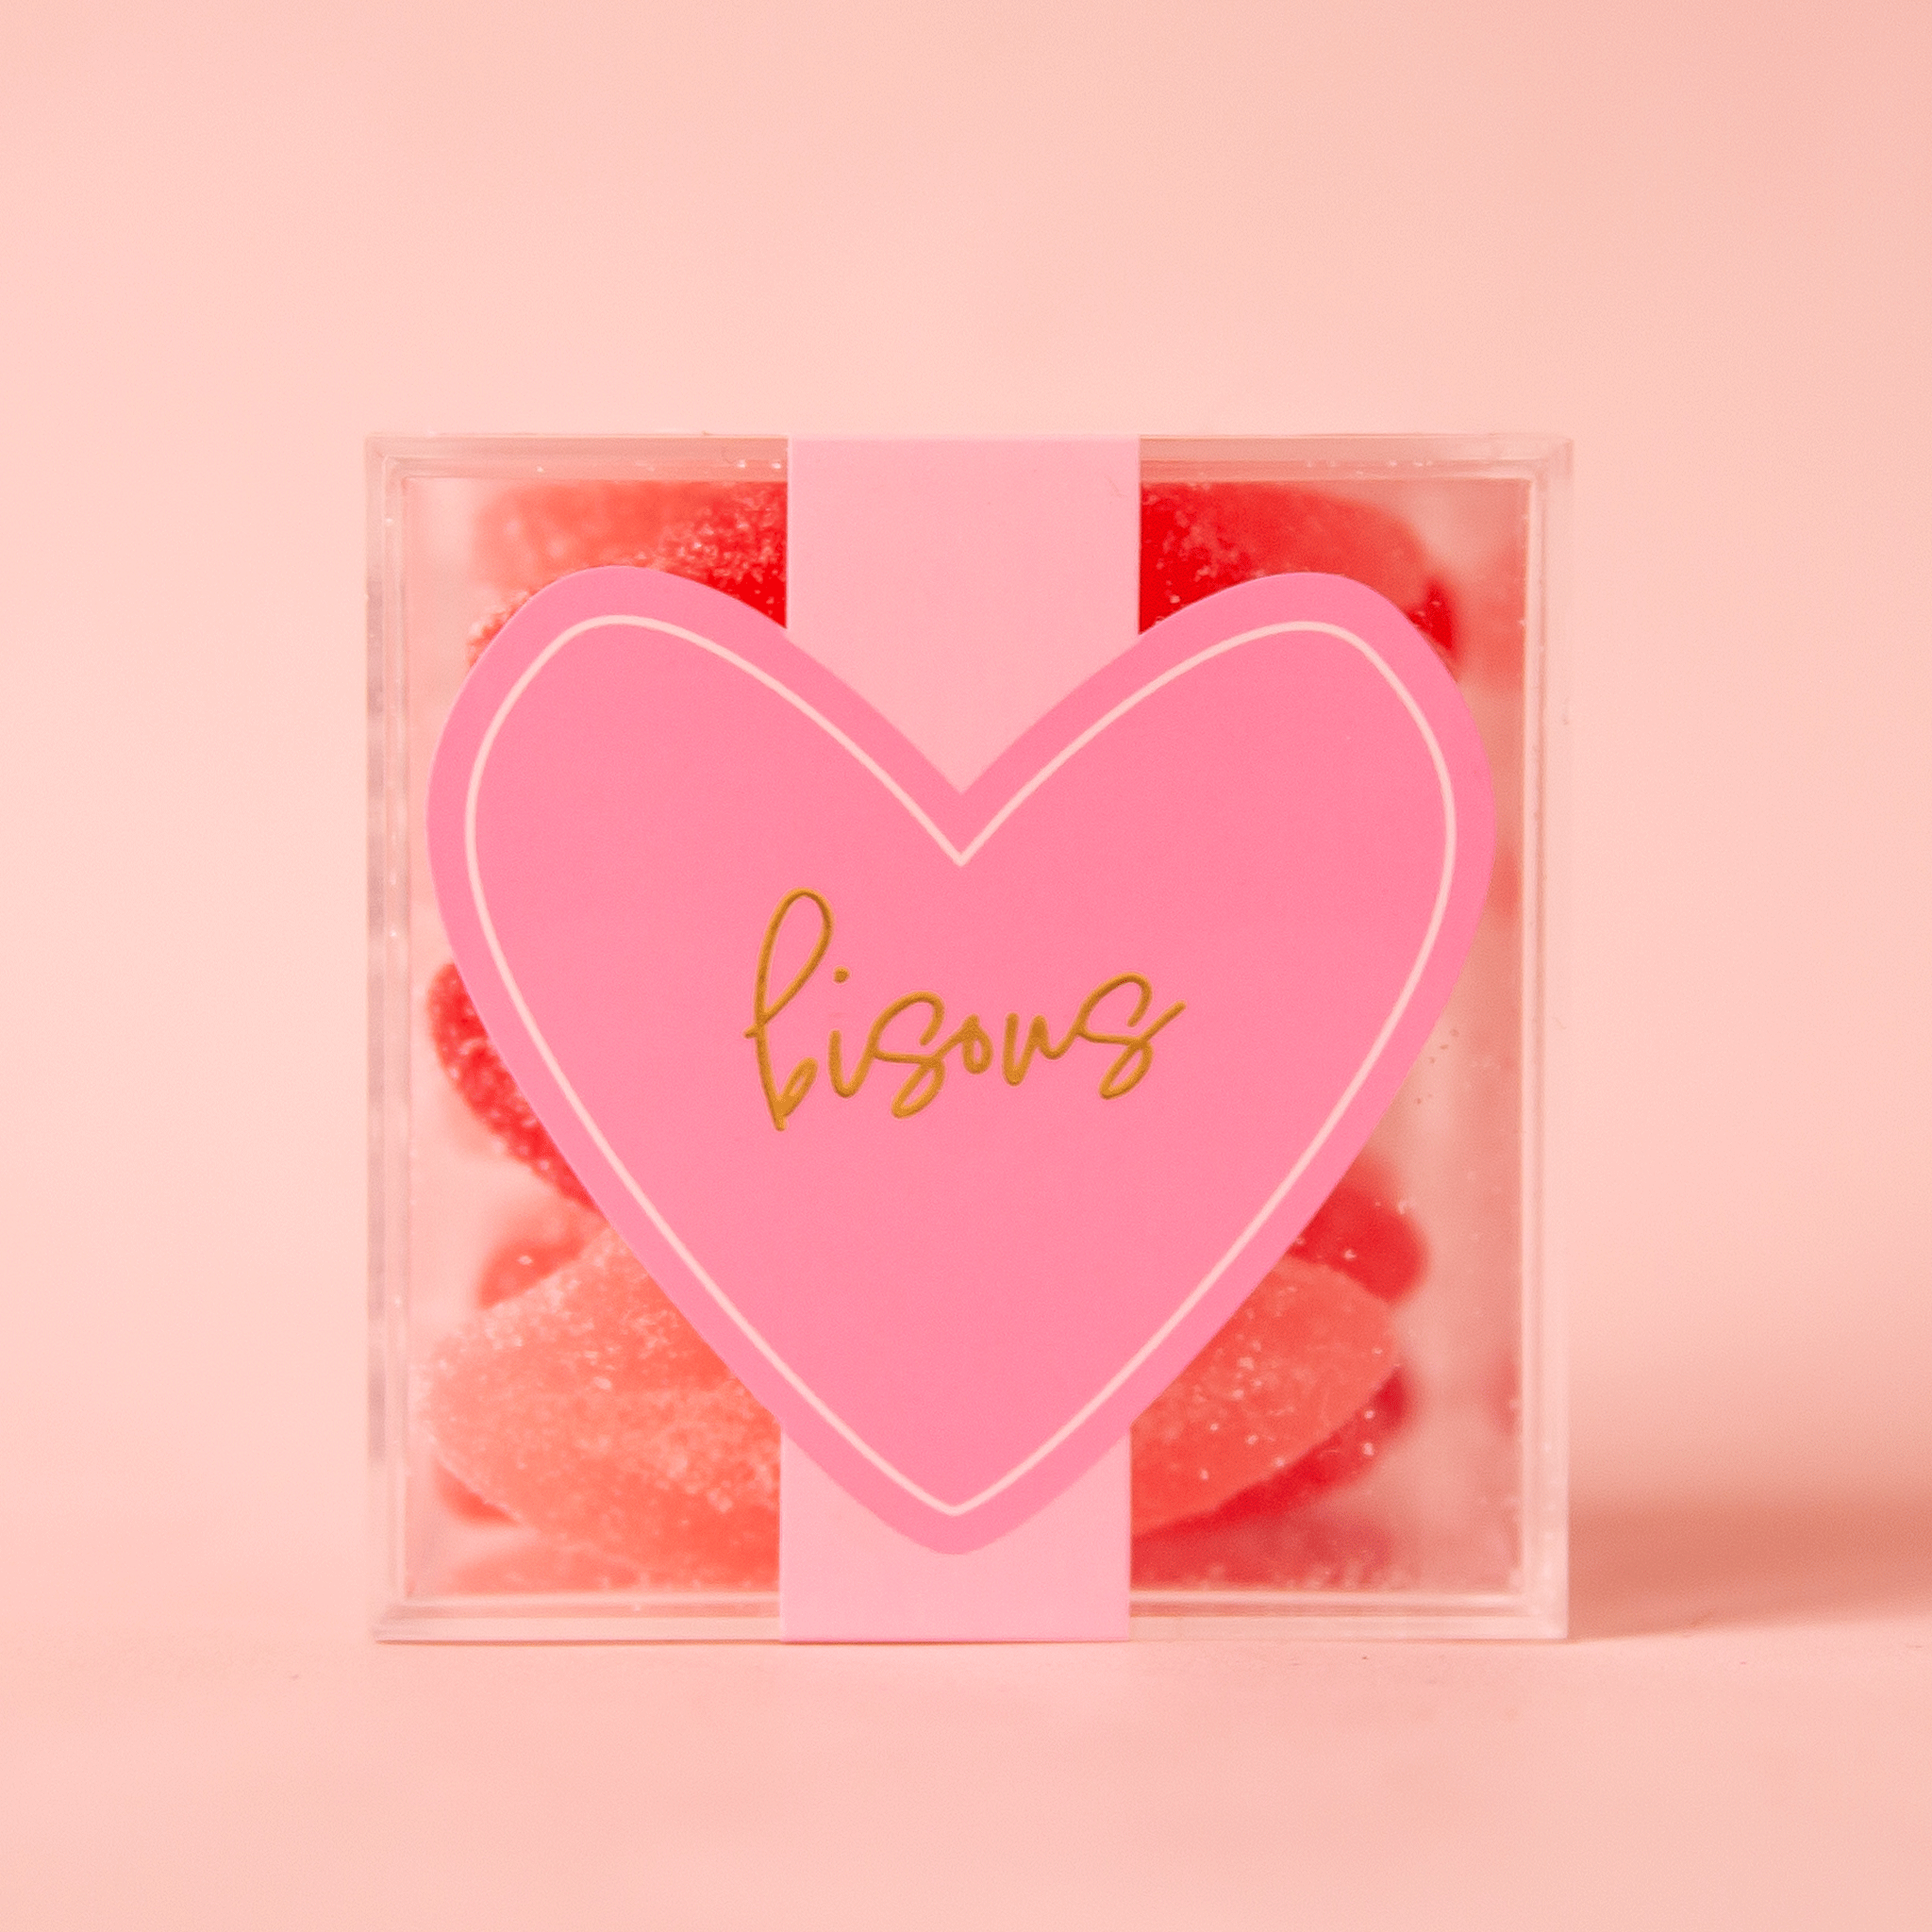 On a pink background is a clear acrylic box filled with sugar lips gummy candies.